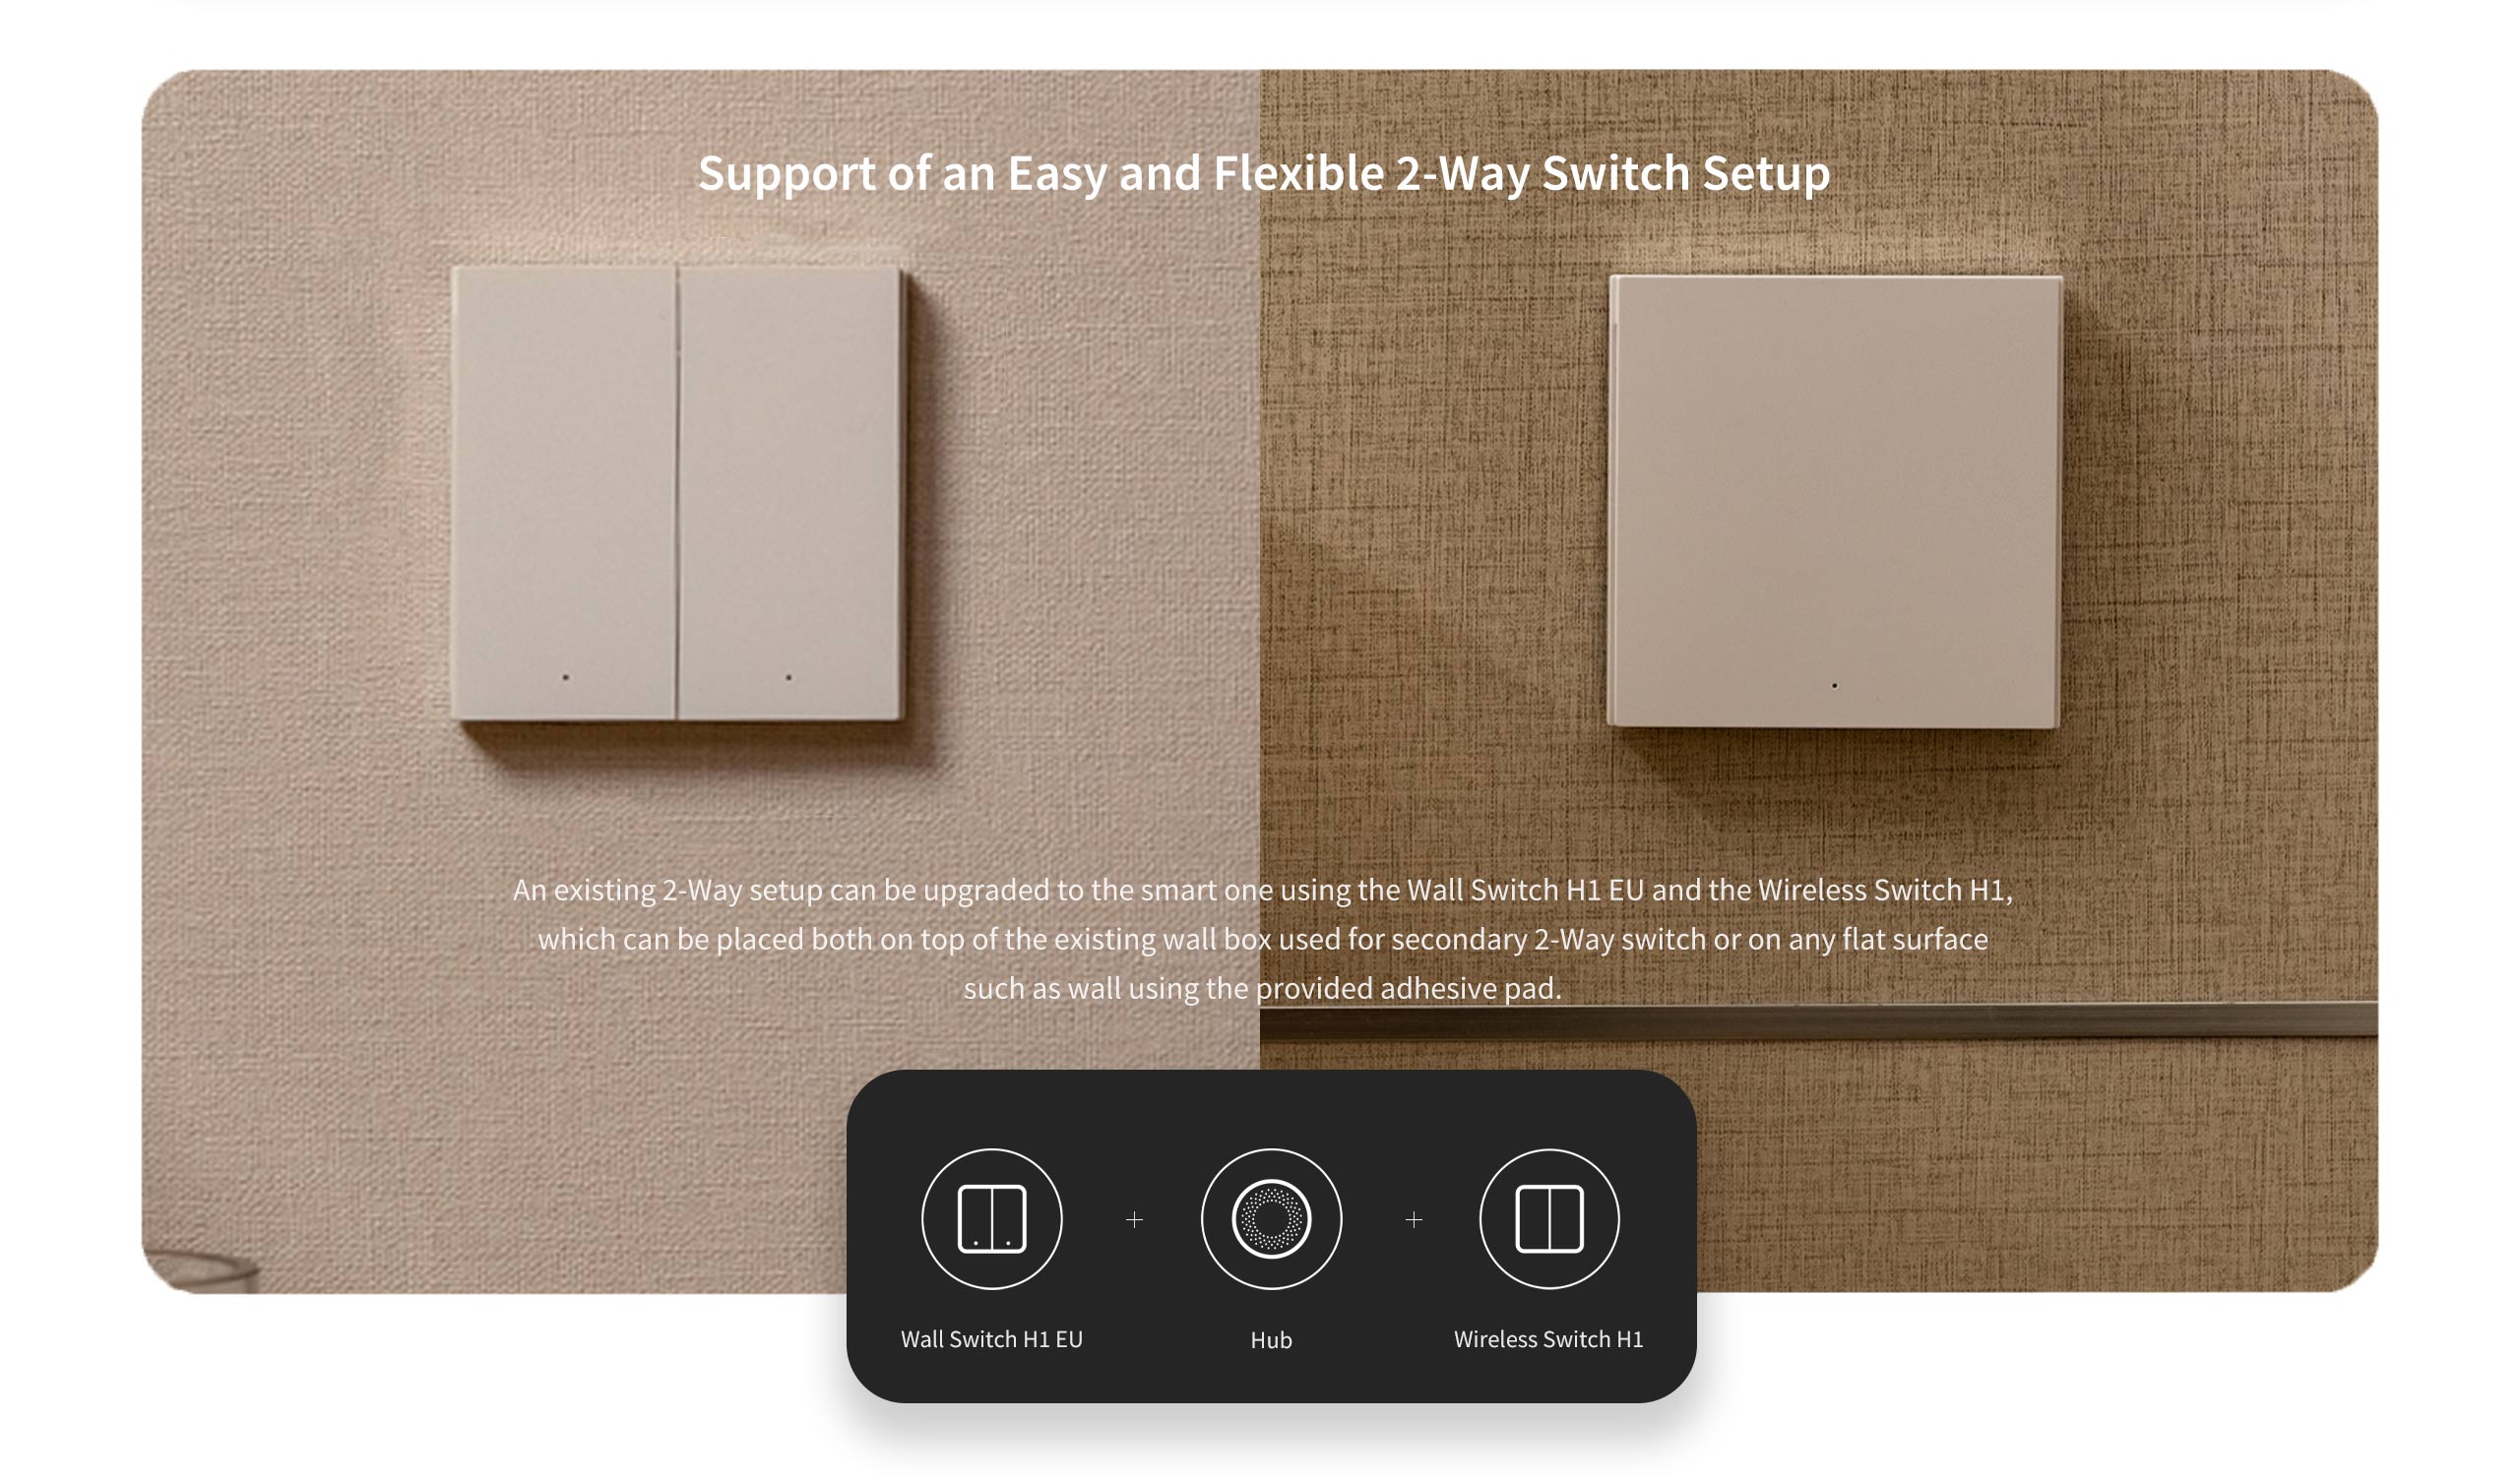 Smart Wall Switch H1 No Neutral pc 05 Aqara Smart Light Switch (No Neutral, Double Rocker), Requires AQARA HUB, Zigbee Light Switch, Remote Control and Smart Home Automation